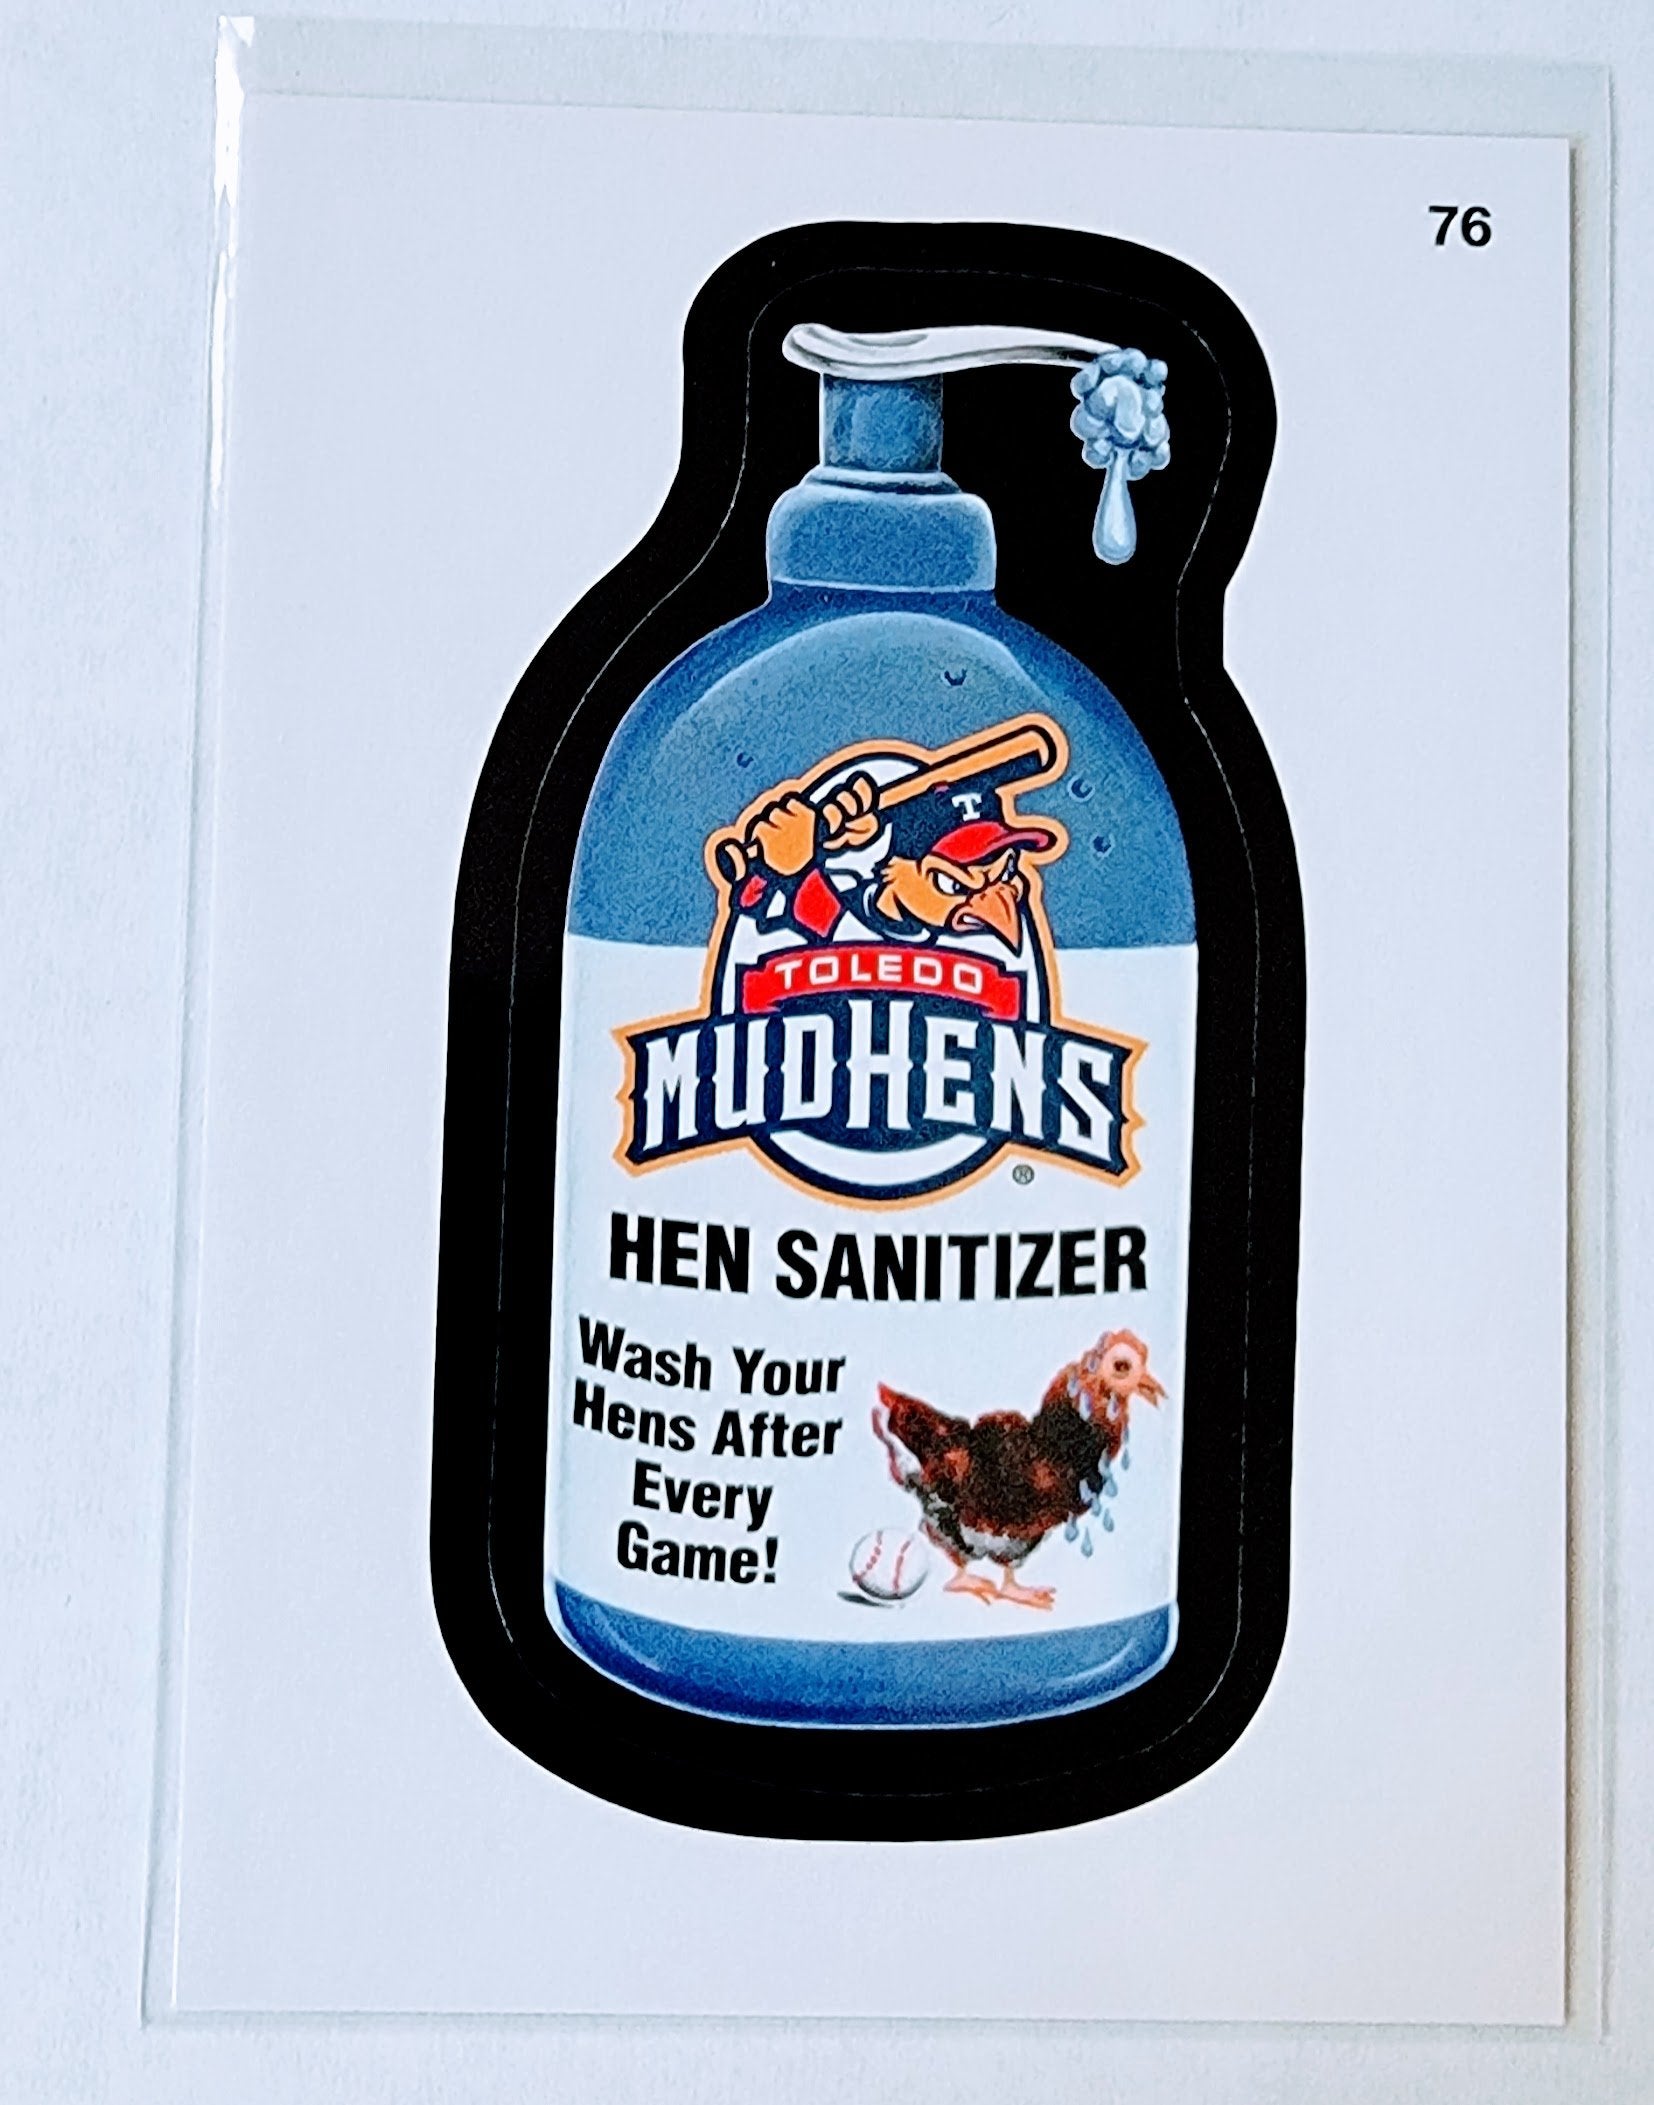 2016 Topps MLB Baseball Wacky Packages Toledo Mudhens Hen Sanitizer Sticker Trading Card MCSC1 simple Xclusive Collectibles   